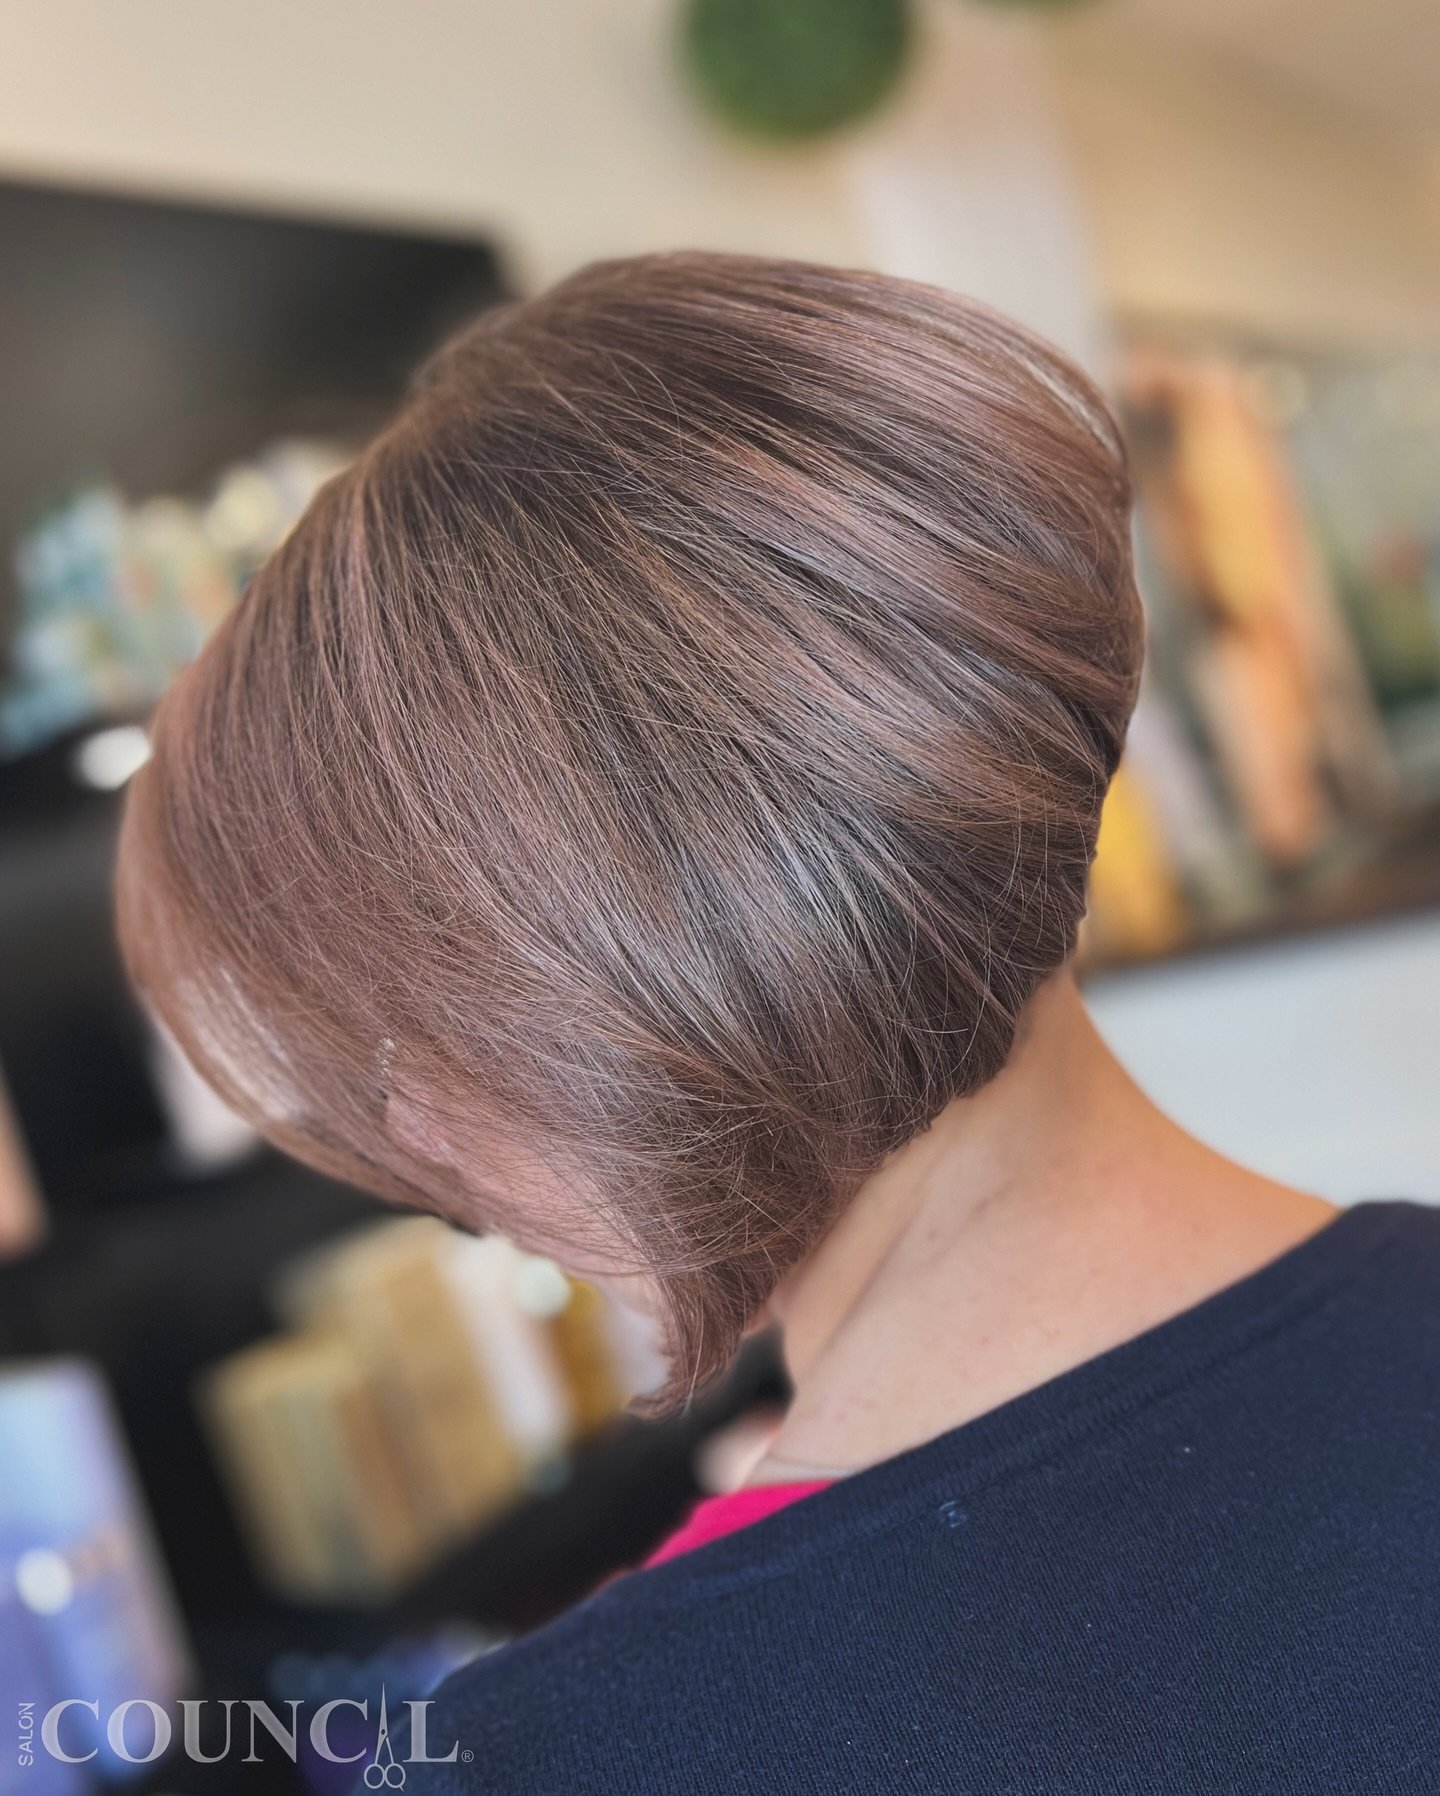 🎉#bobhairstyle 
Stepping out with a perfect modern bob haircut and a stunning dimensional rose gold color blend! 
A fresh look that turns heads and sparks conversations. #RoseGoldHair #ModernBob

HEAVY FOILS &bull; TONER &bull; OLAPLEX &bull; HAIRCU